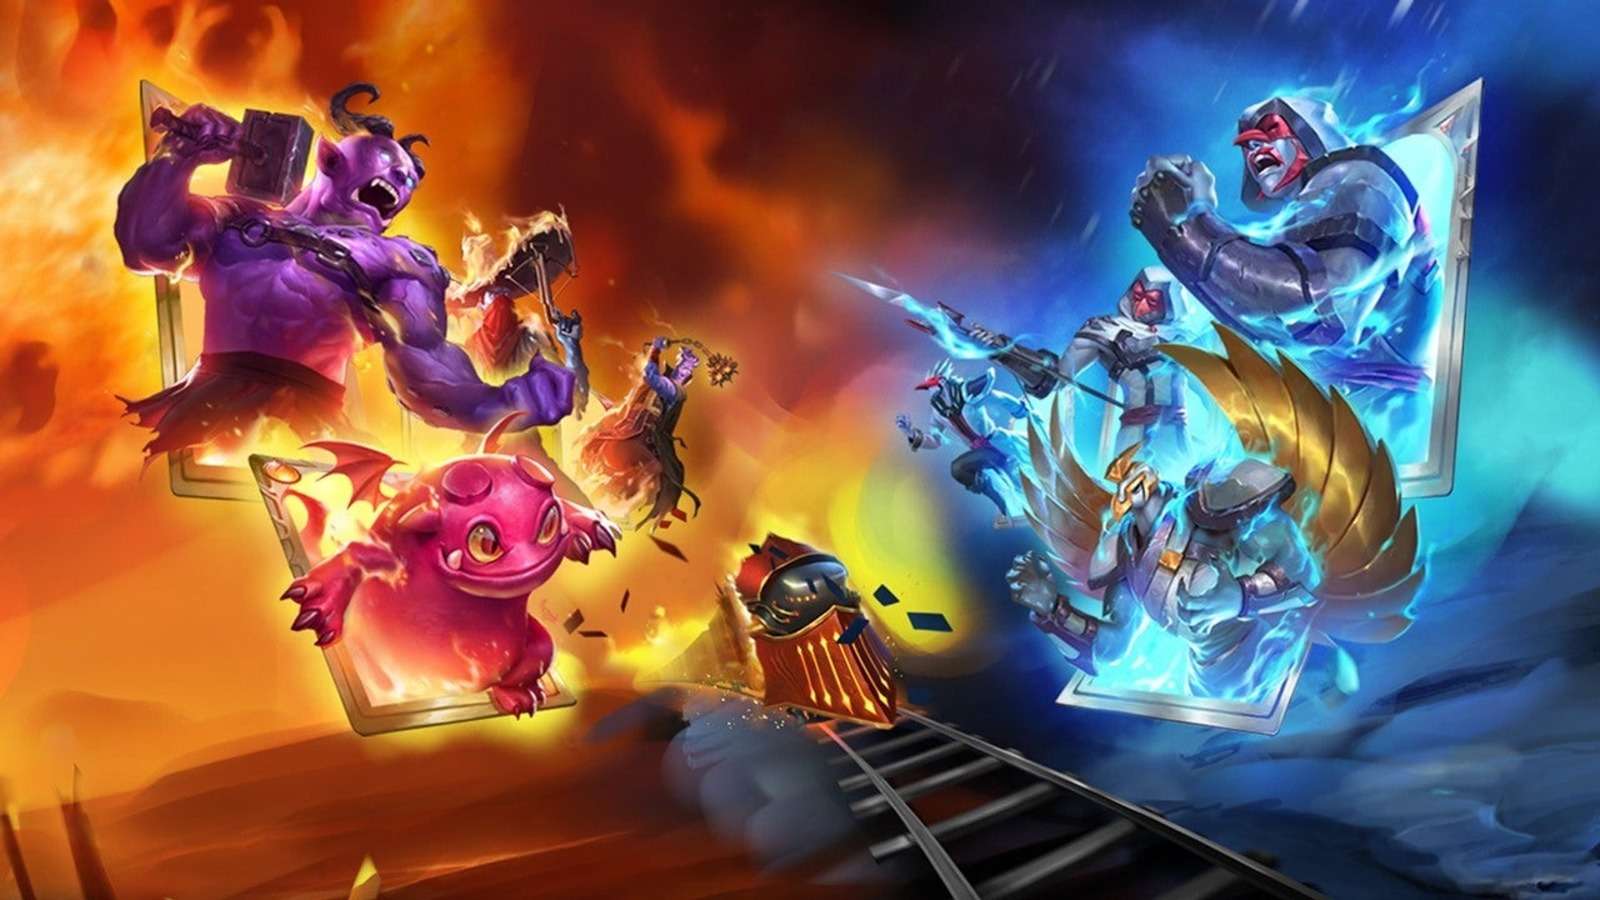 An image of keyart from Monster Train, a game like Slay the Spire.